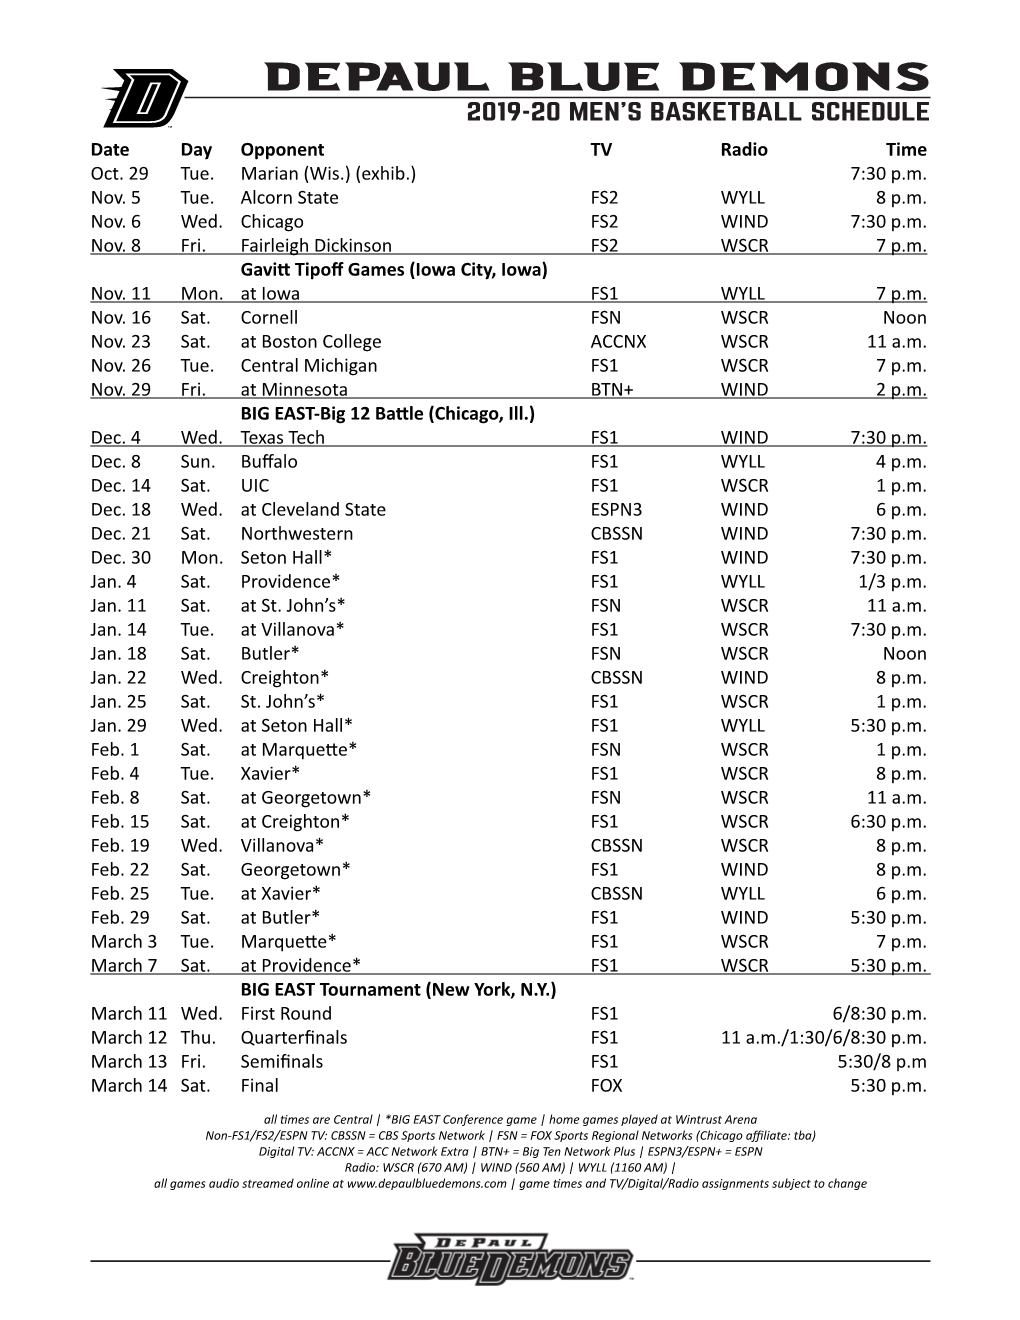 DEPAUL BLUE DEMONS 2019-20 MEN's BASKETBALL SCHEDULE Date Day Opponent TV Radio Time Oct